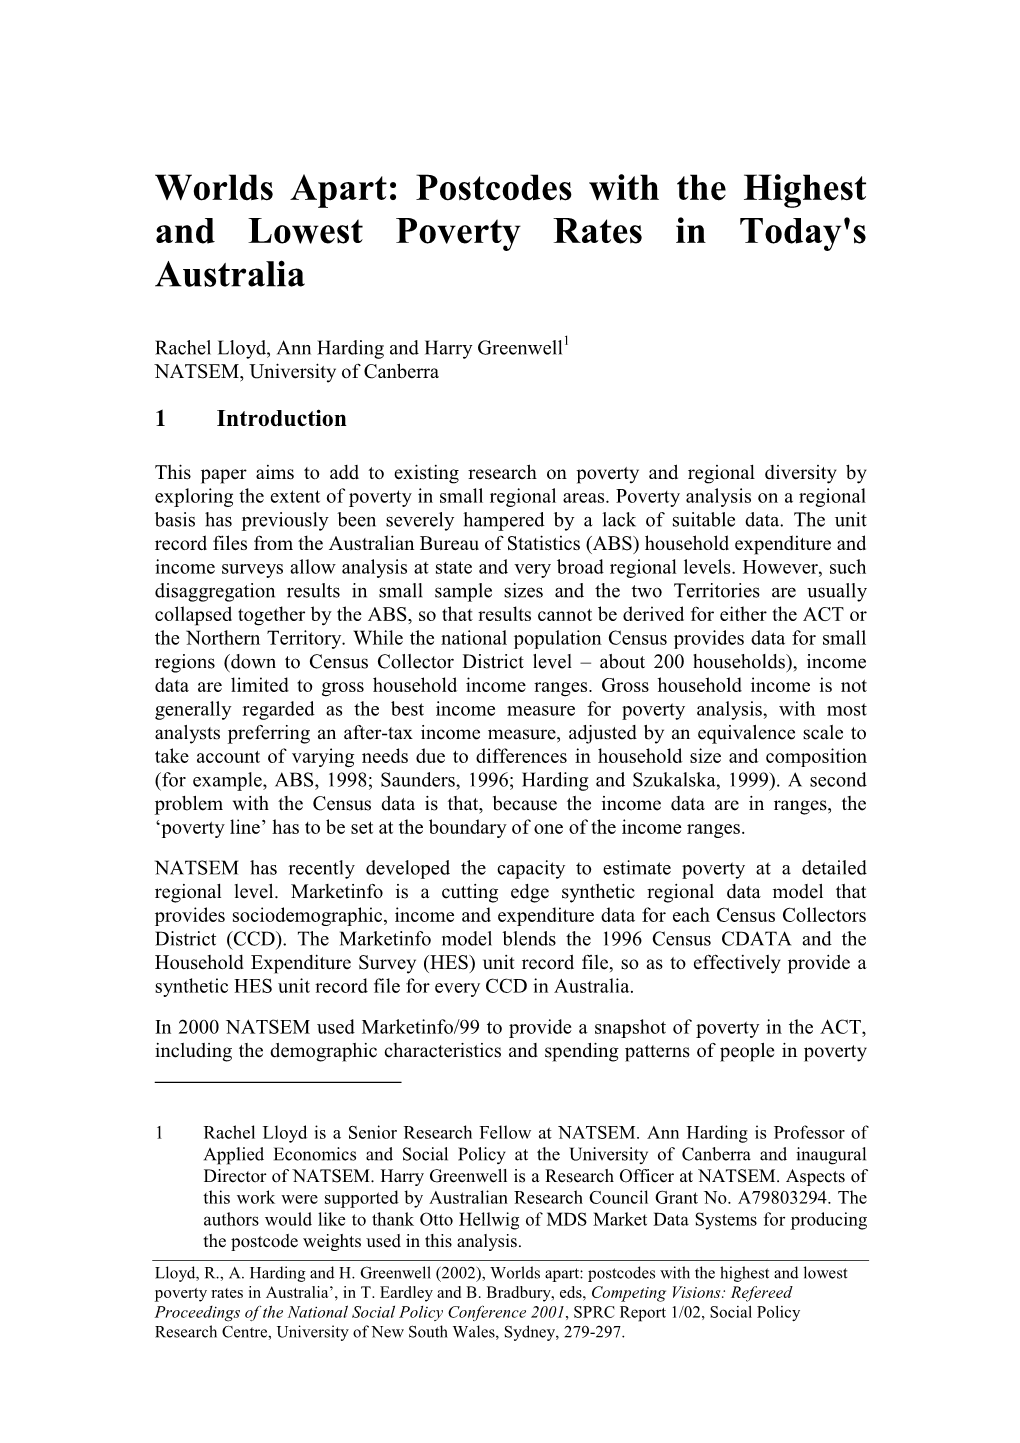 Postcodes with the Highest and Lowest Poverty Rates in Today's Australia